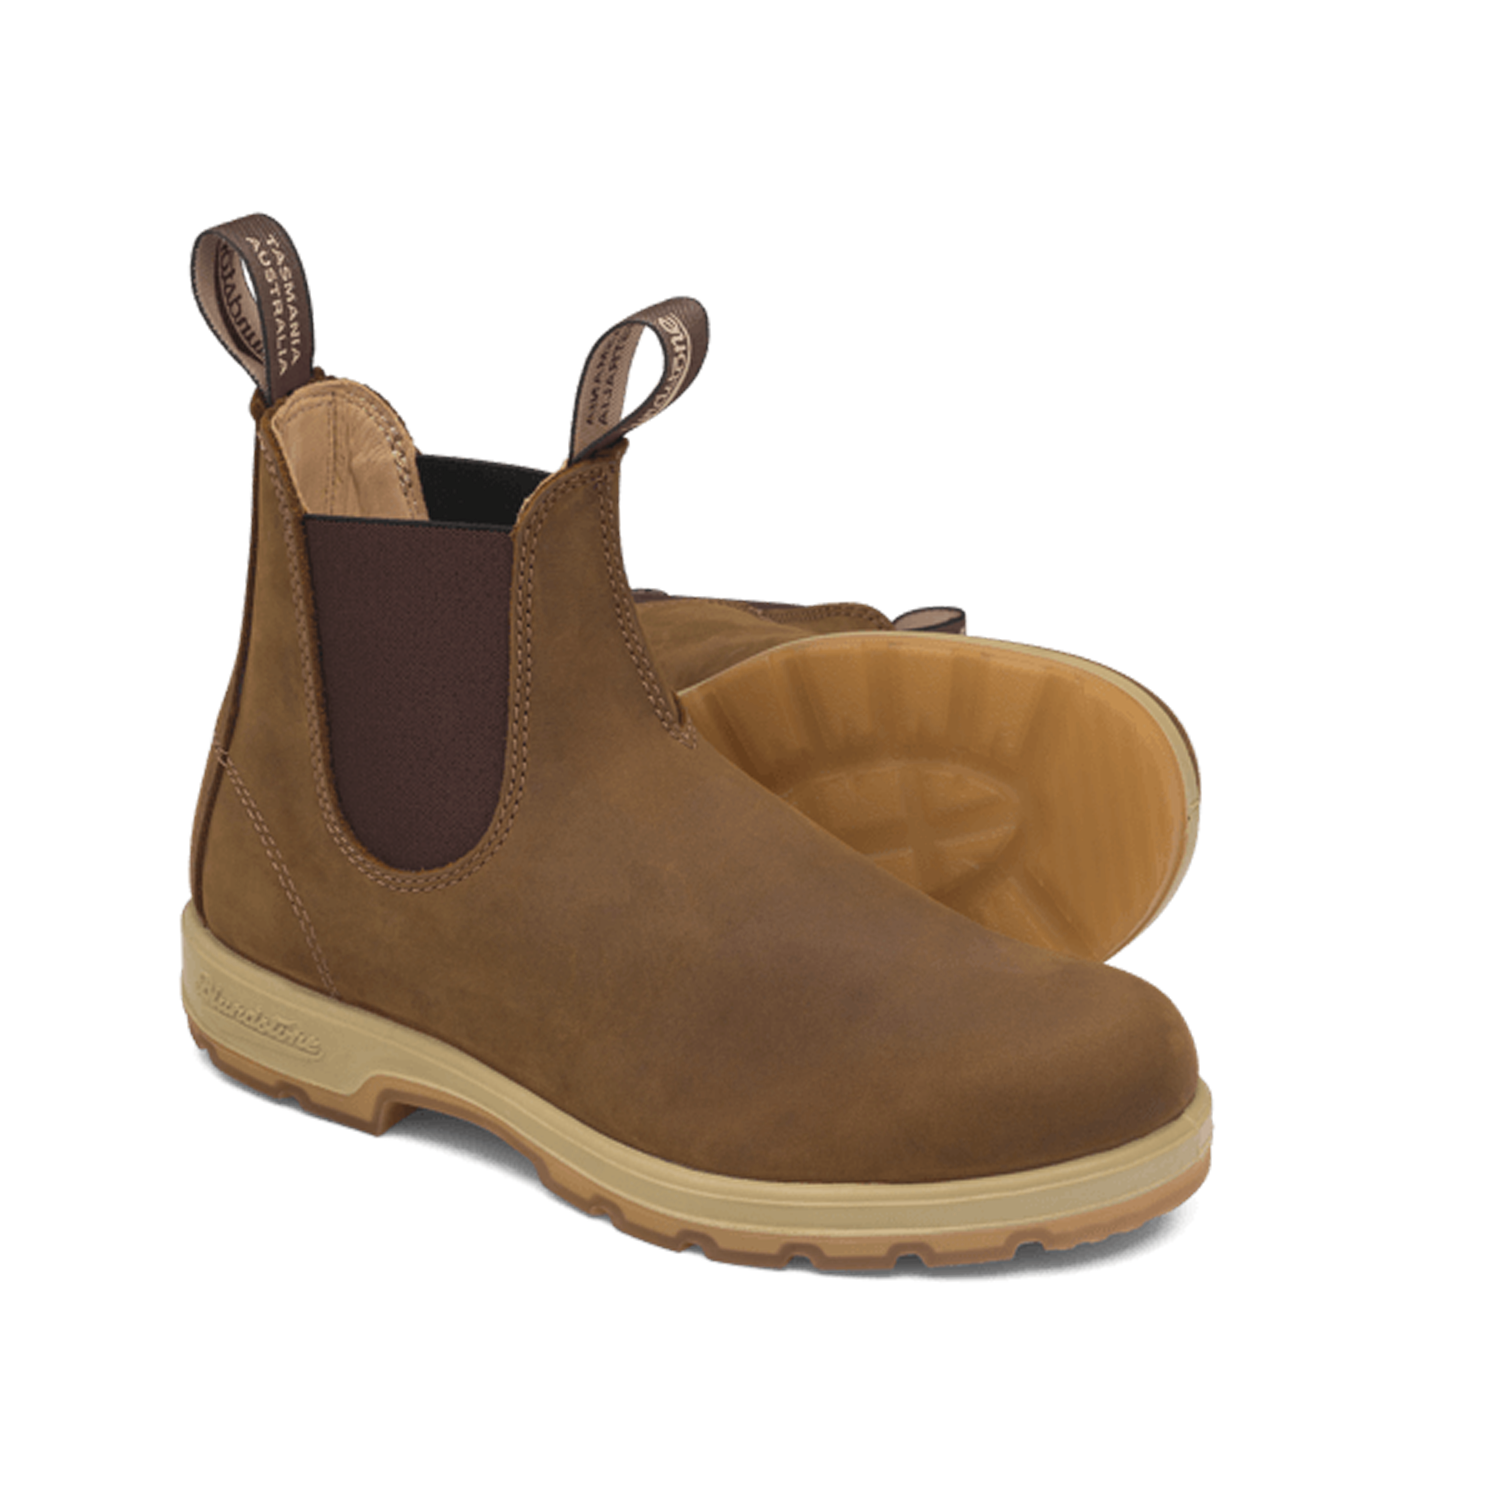 Blundstone 1320 Classic Saddle Brown with Gum Sole